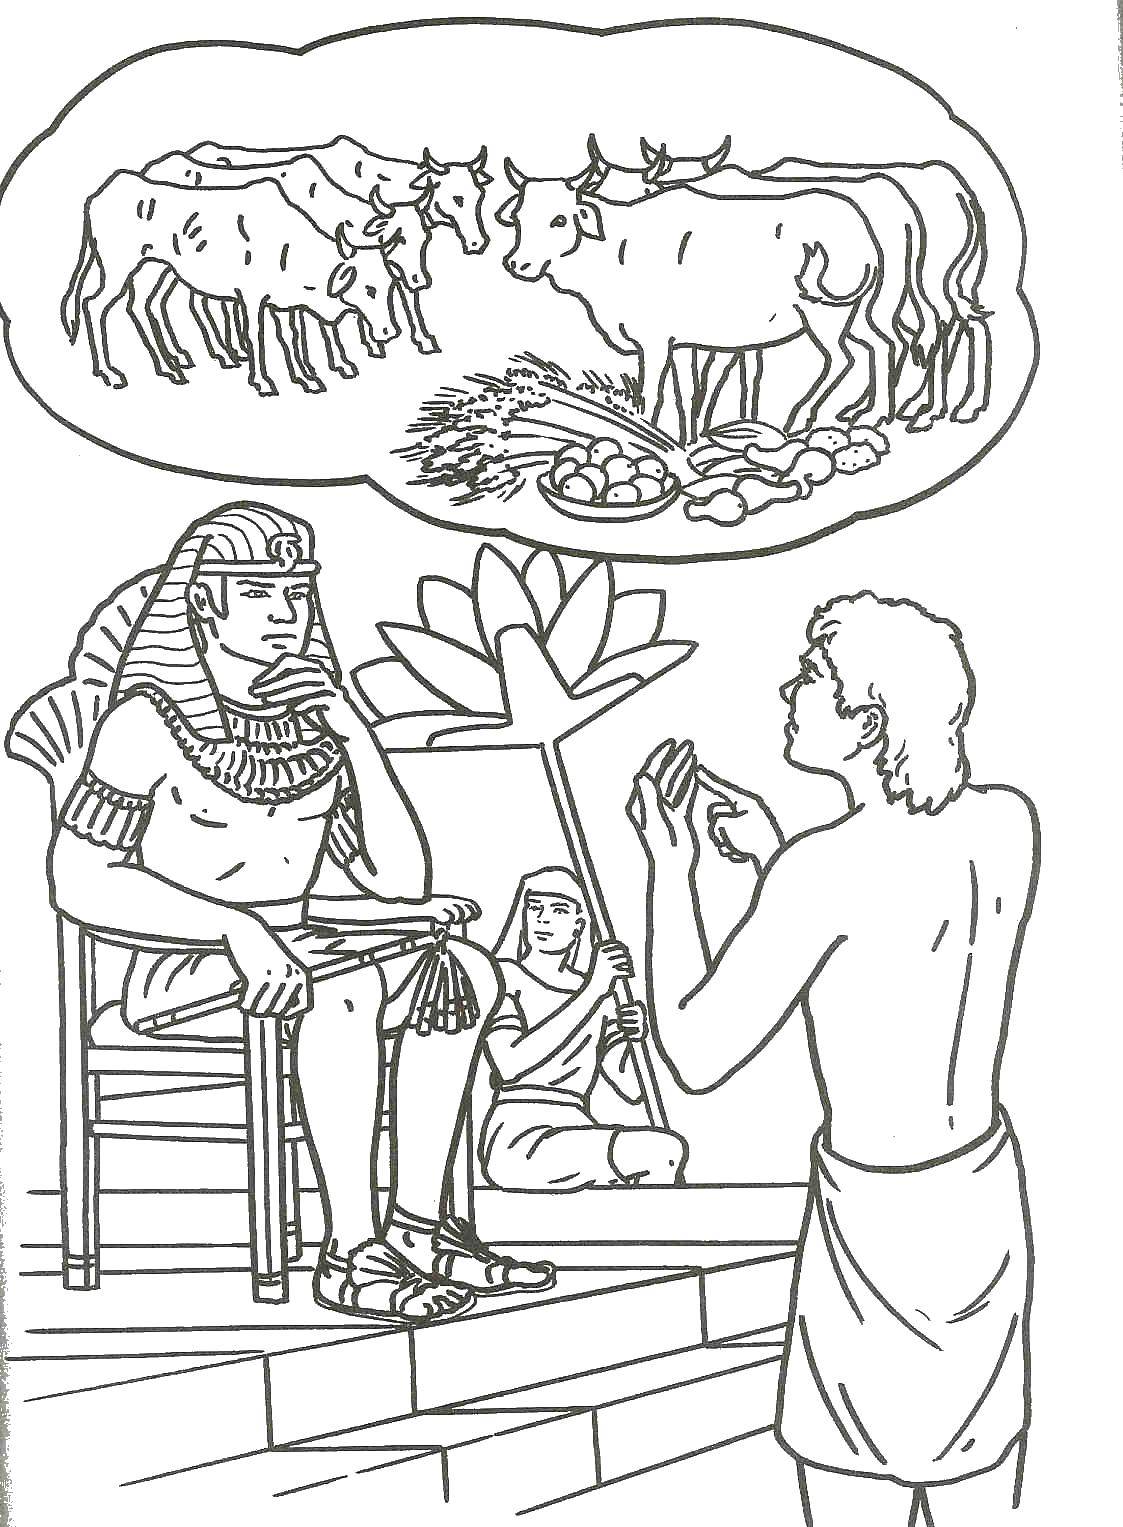 Coloring Treaties with Pharaoh. Category Egypt. Tags:  Egypt.